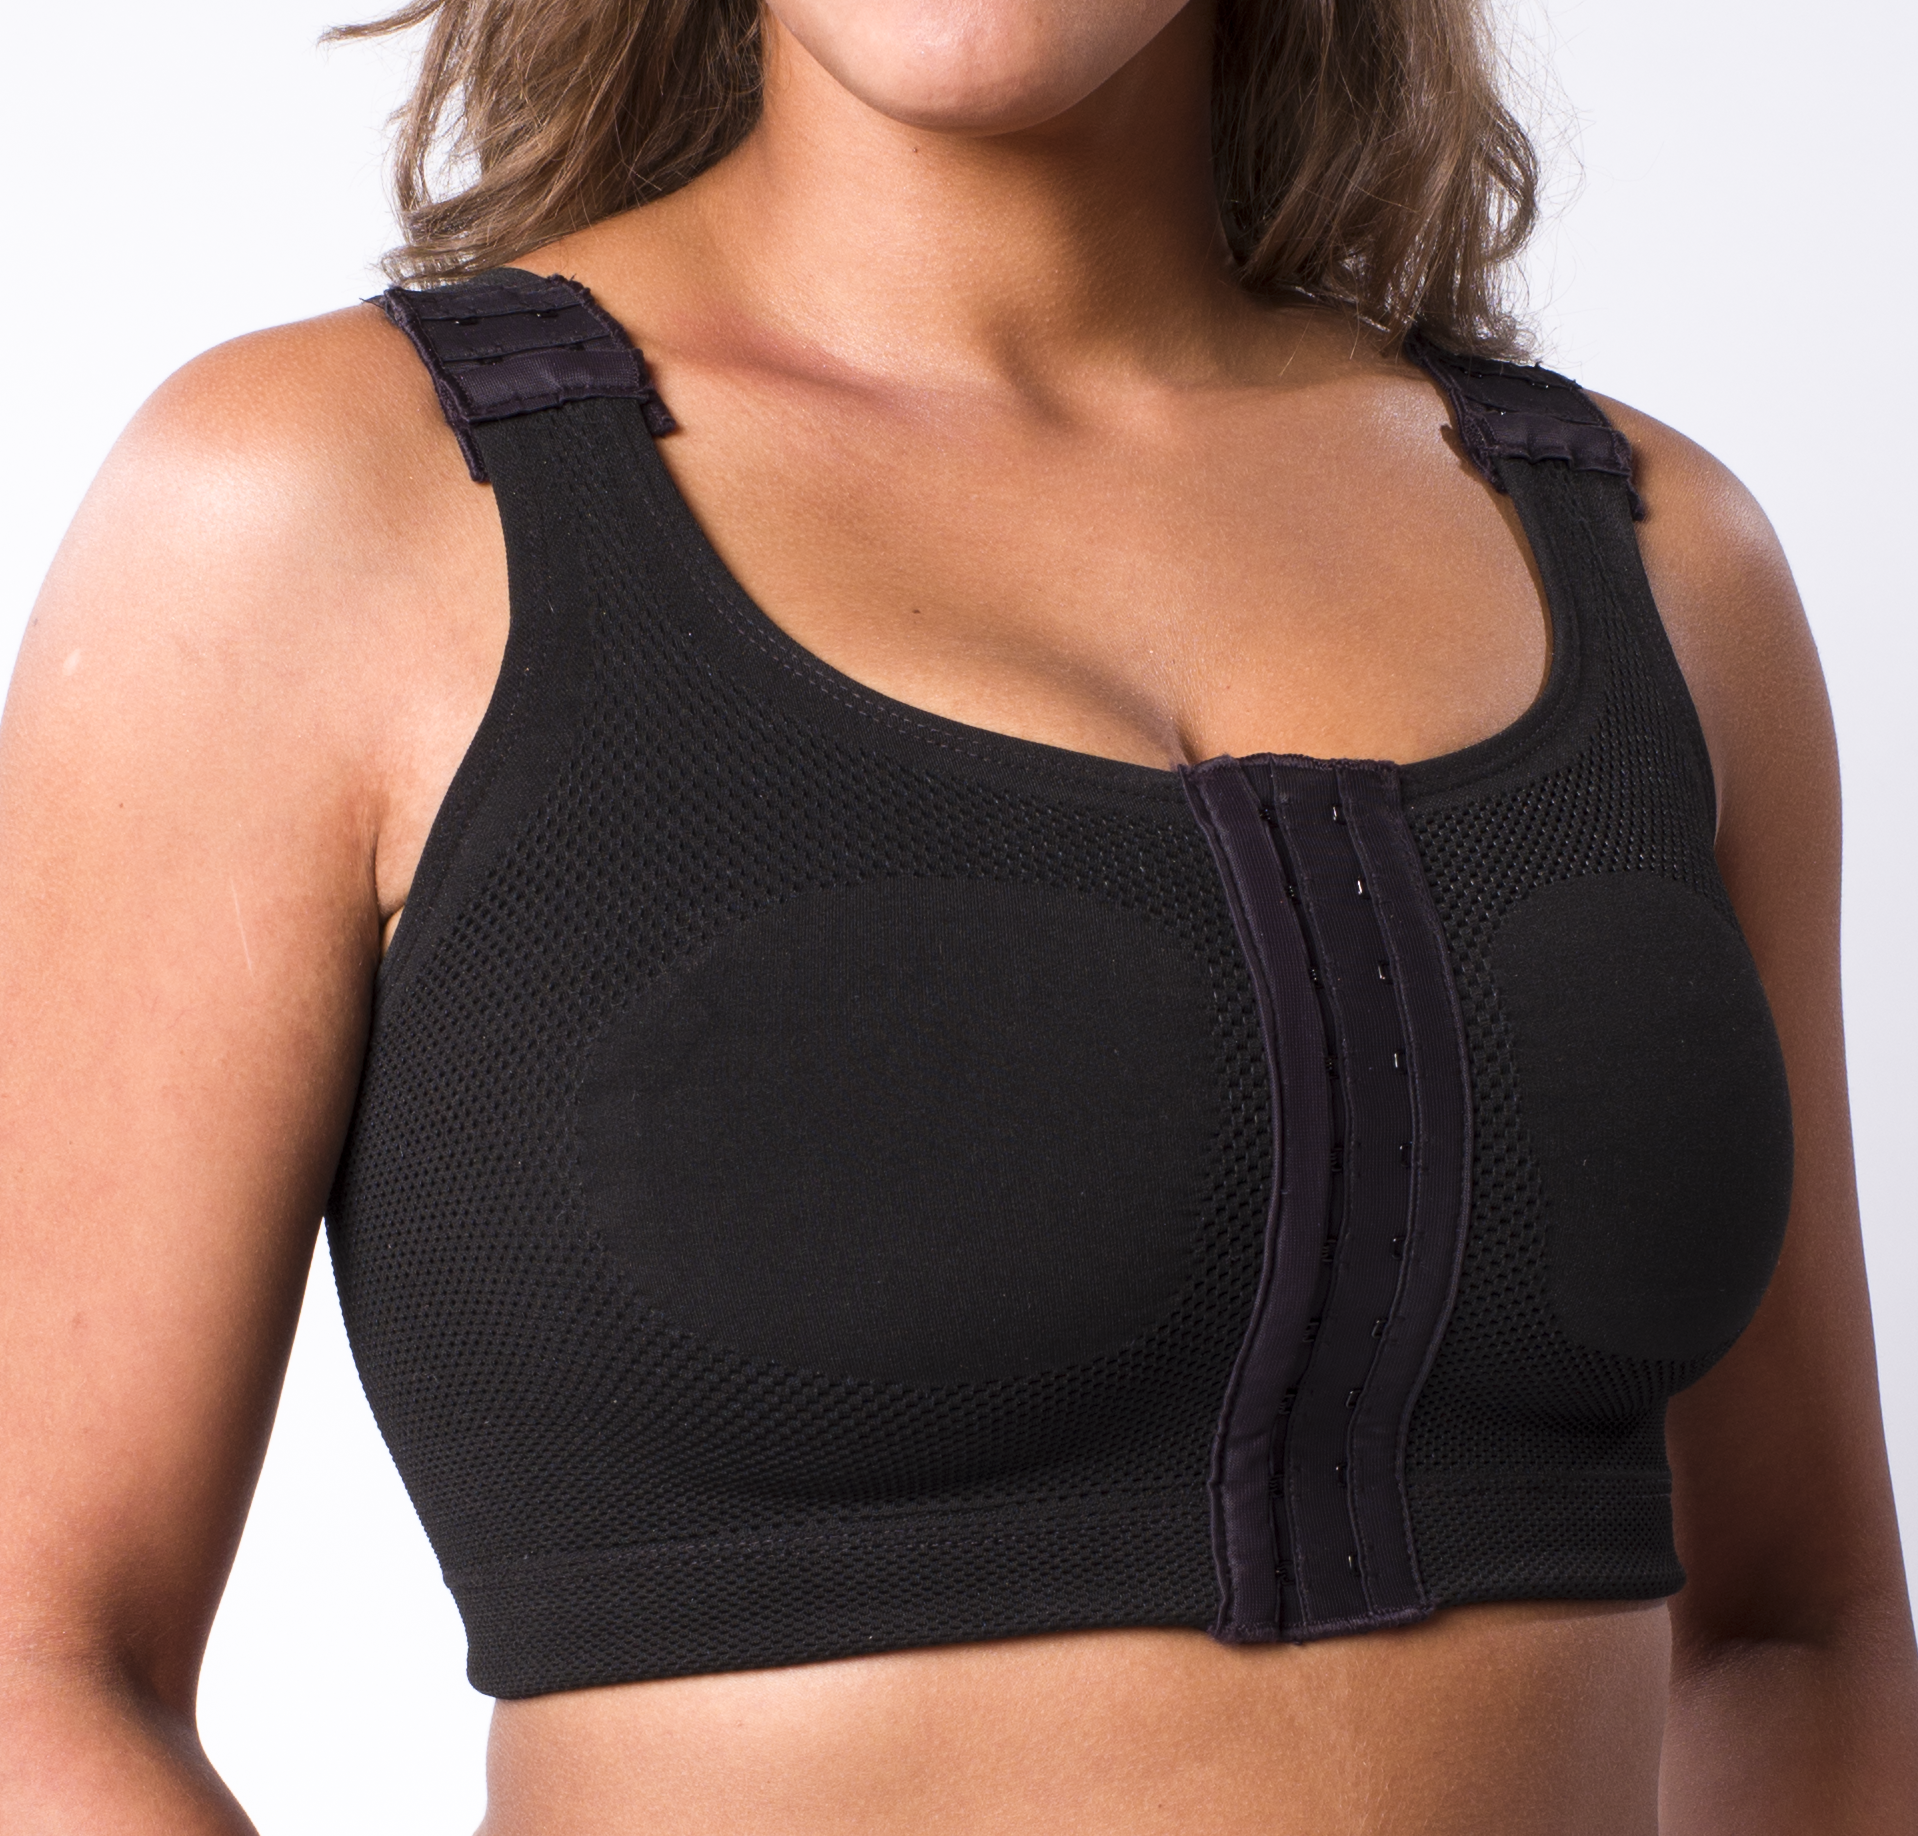 Compression Bra - Firm Support – AngelCare Compression Medical